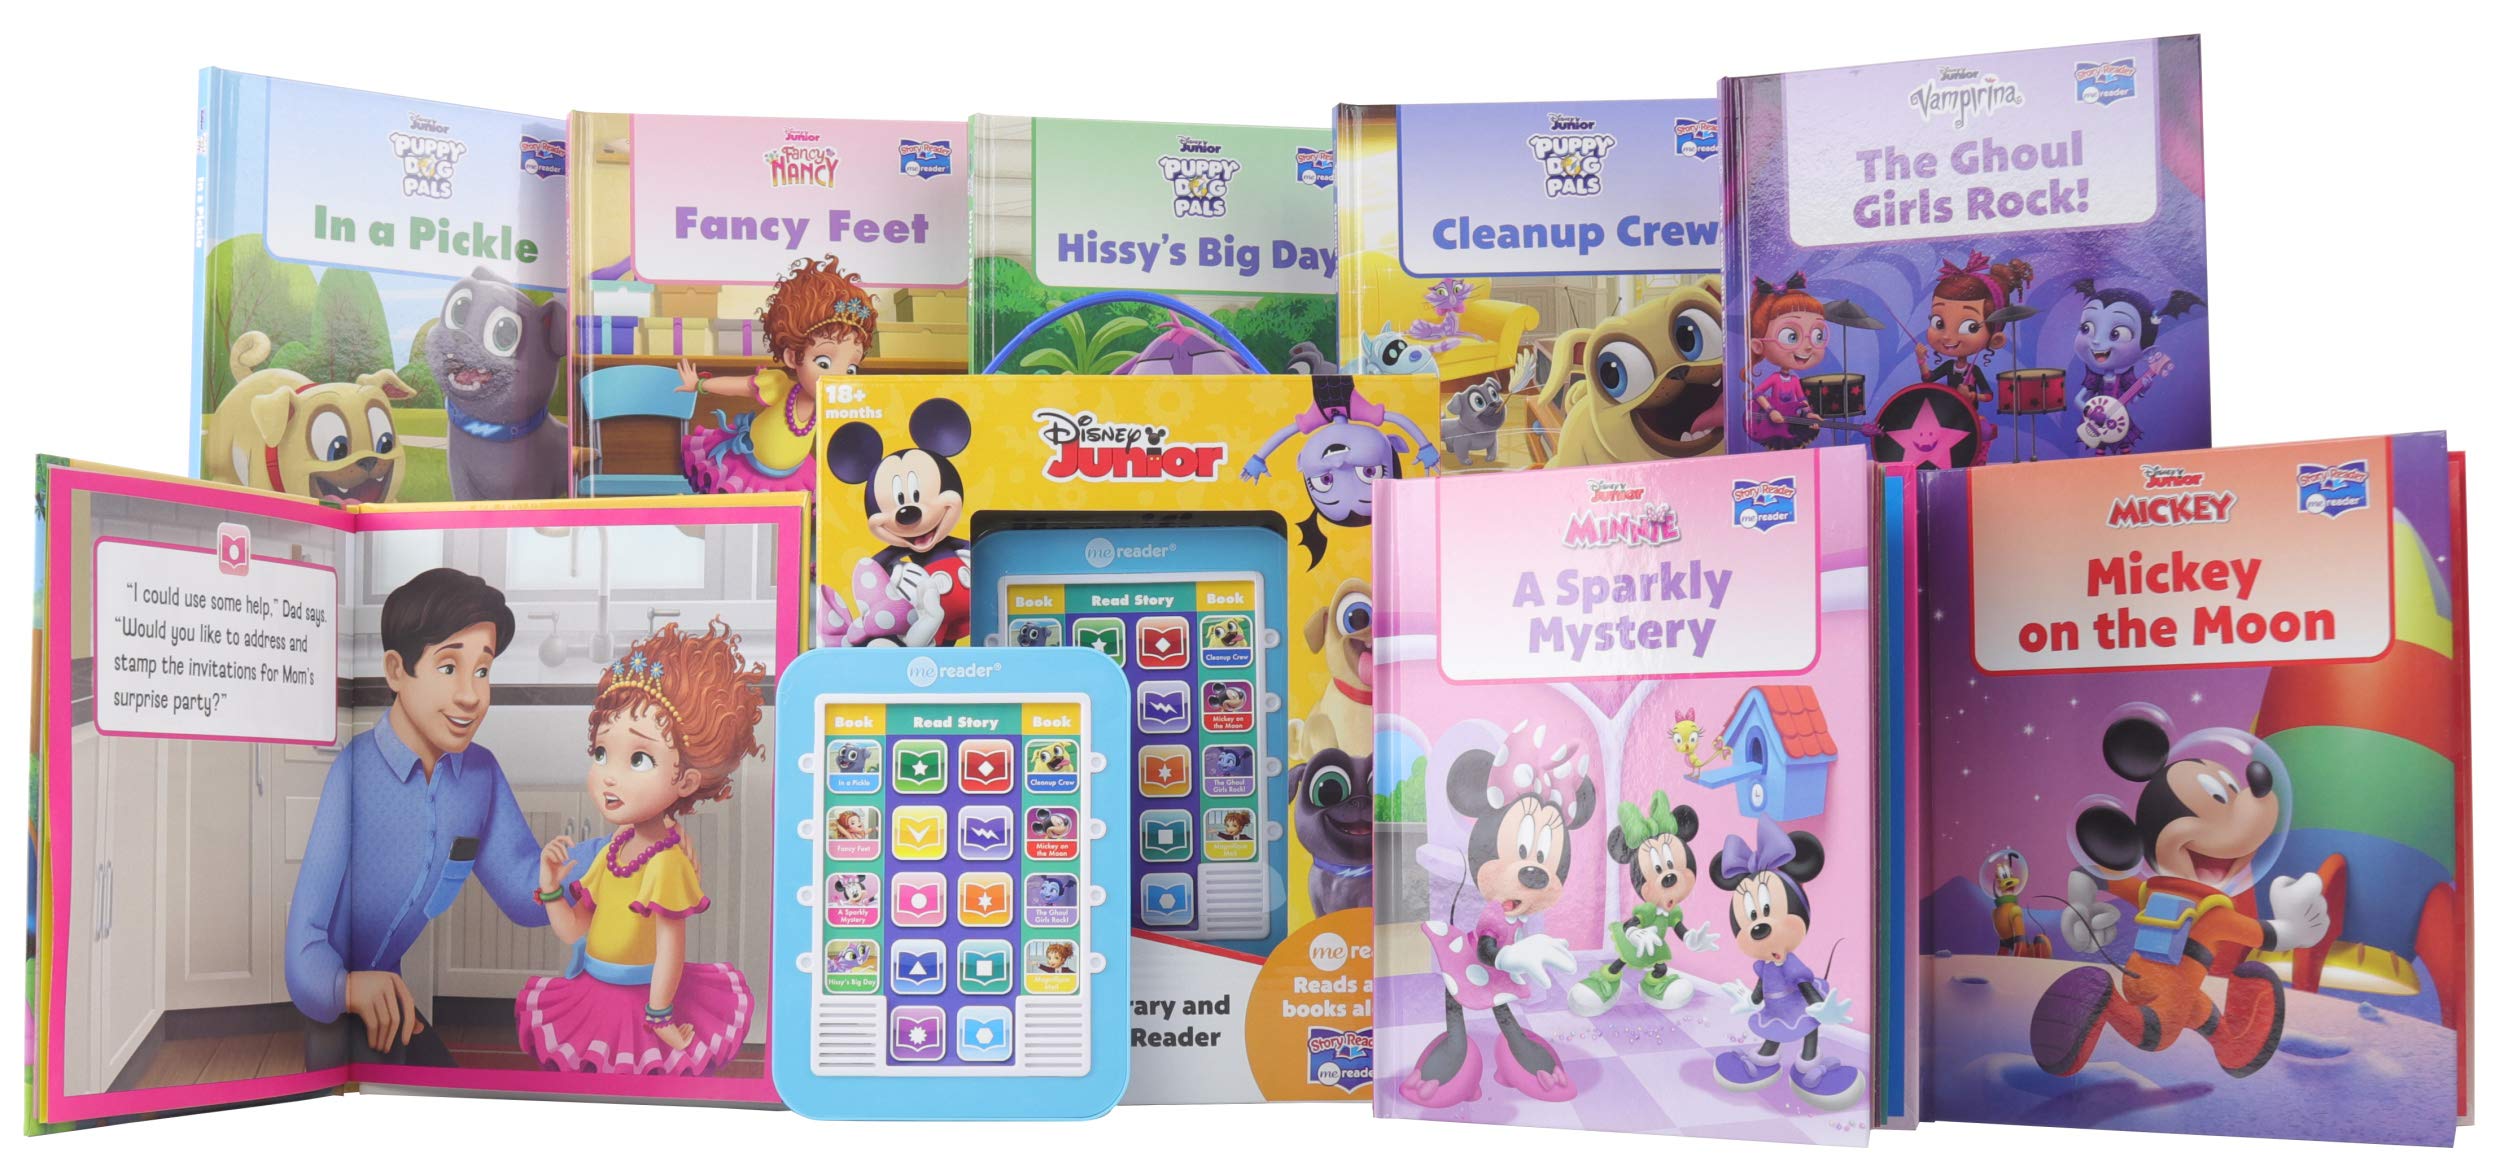 Disney Junior Mickey Mouse Clubhouse, Puppy Dog Pals and More!- Me Reader Electronic Reader and 8-Book Library - The English Bookshop Kuwait